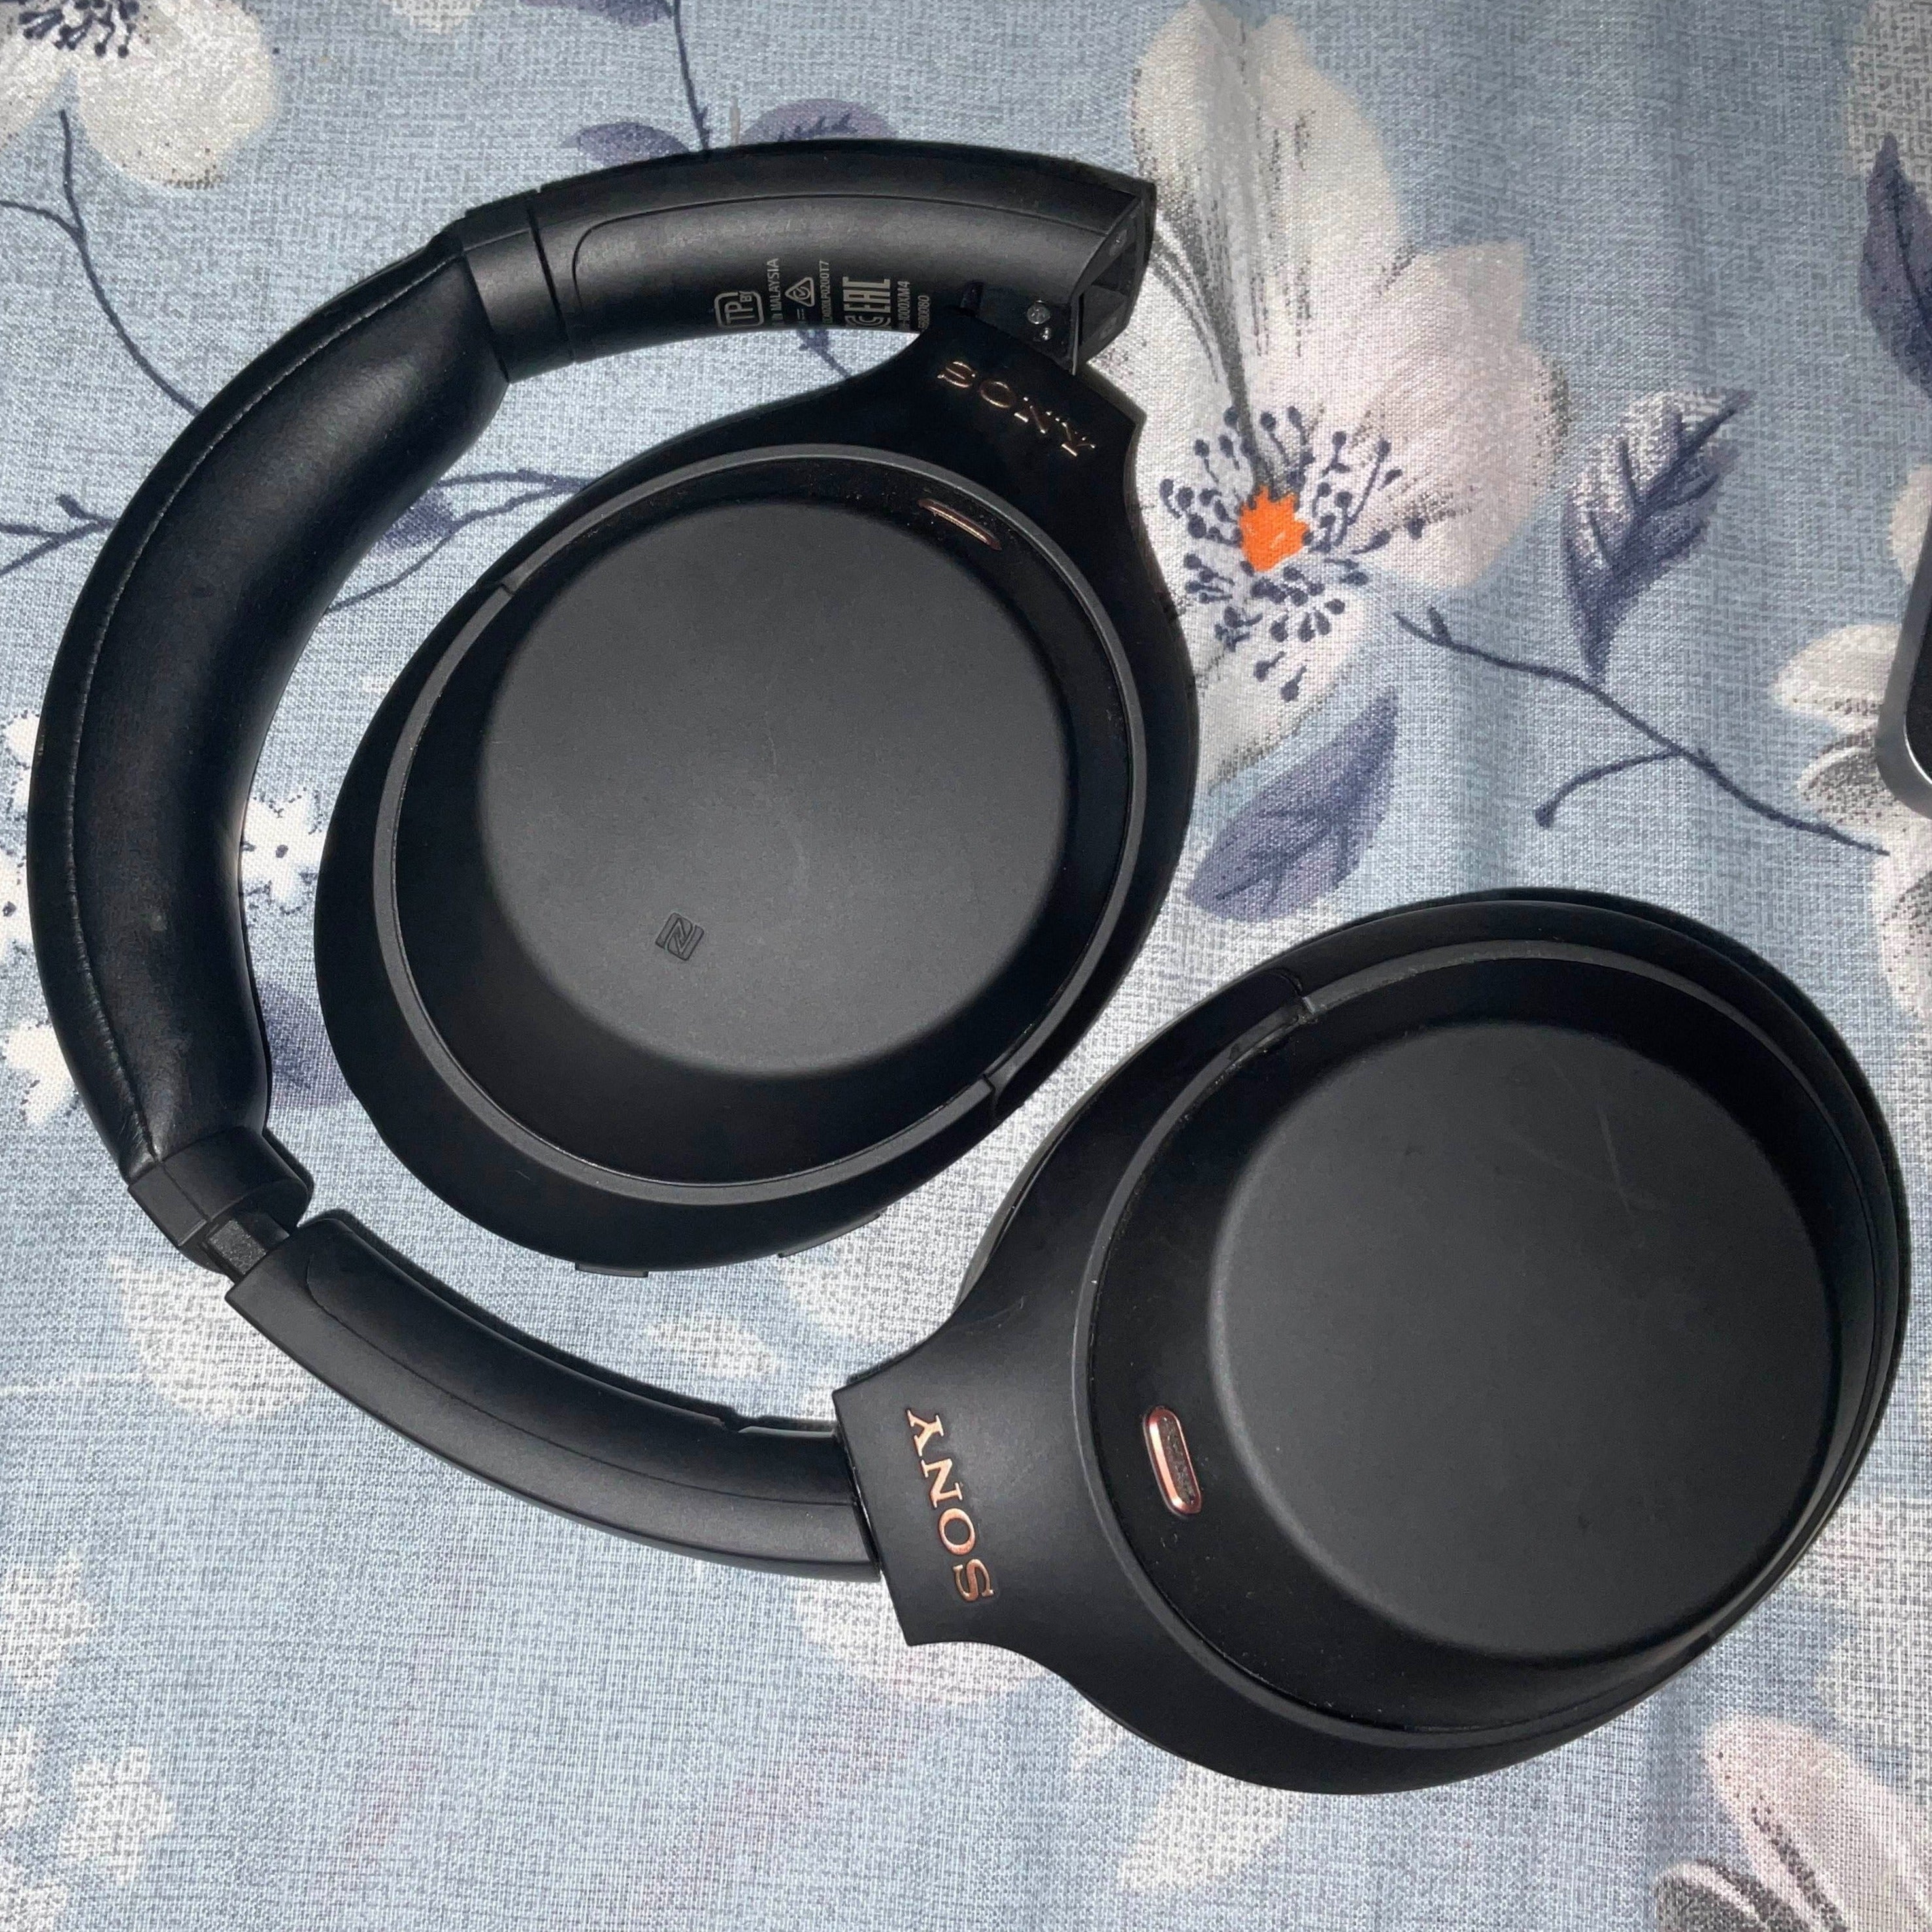 Sony - WH-1000XM4 (Pre-Owned)